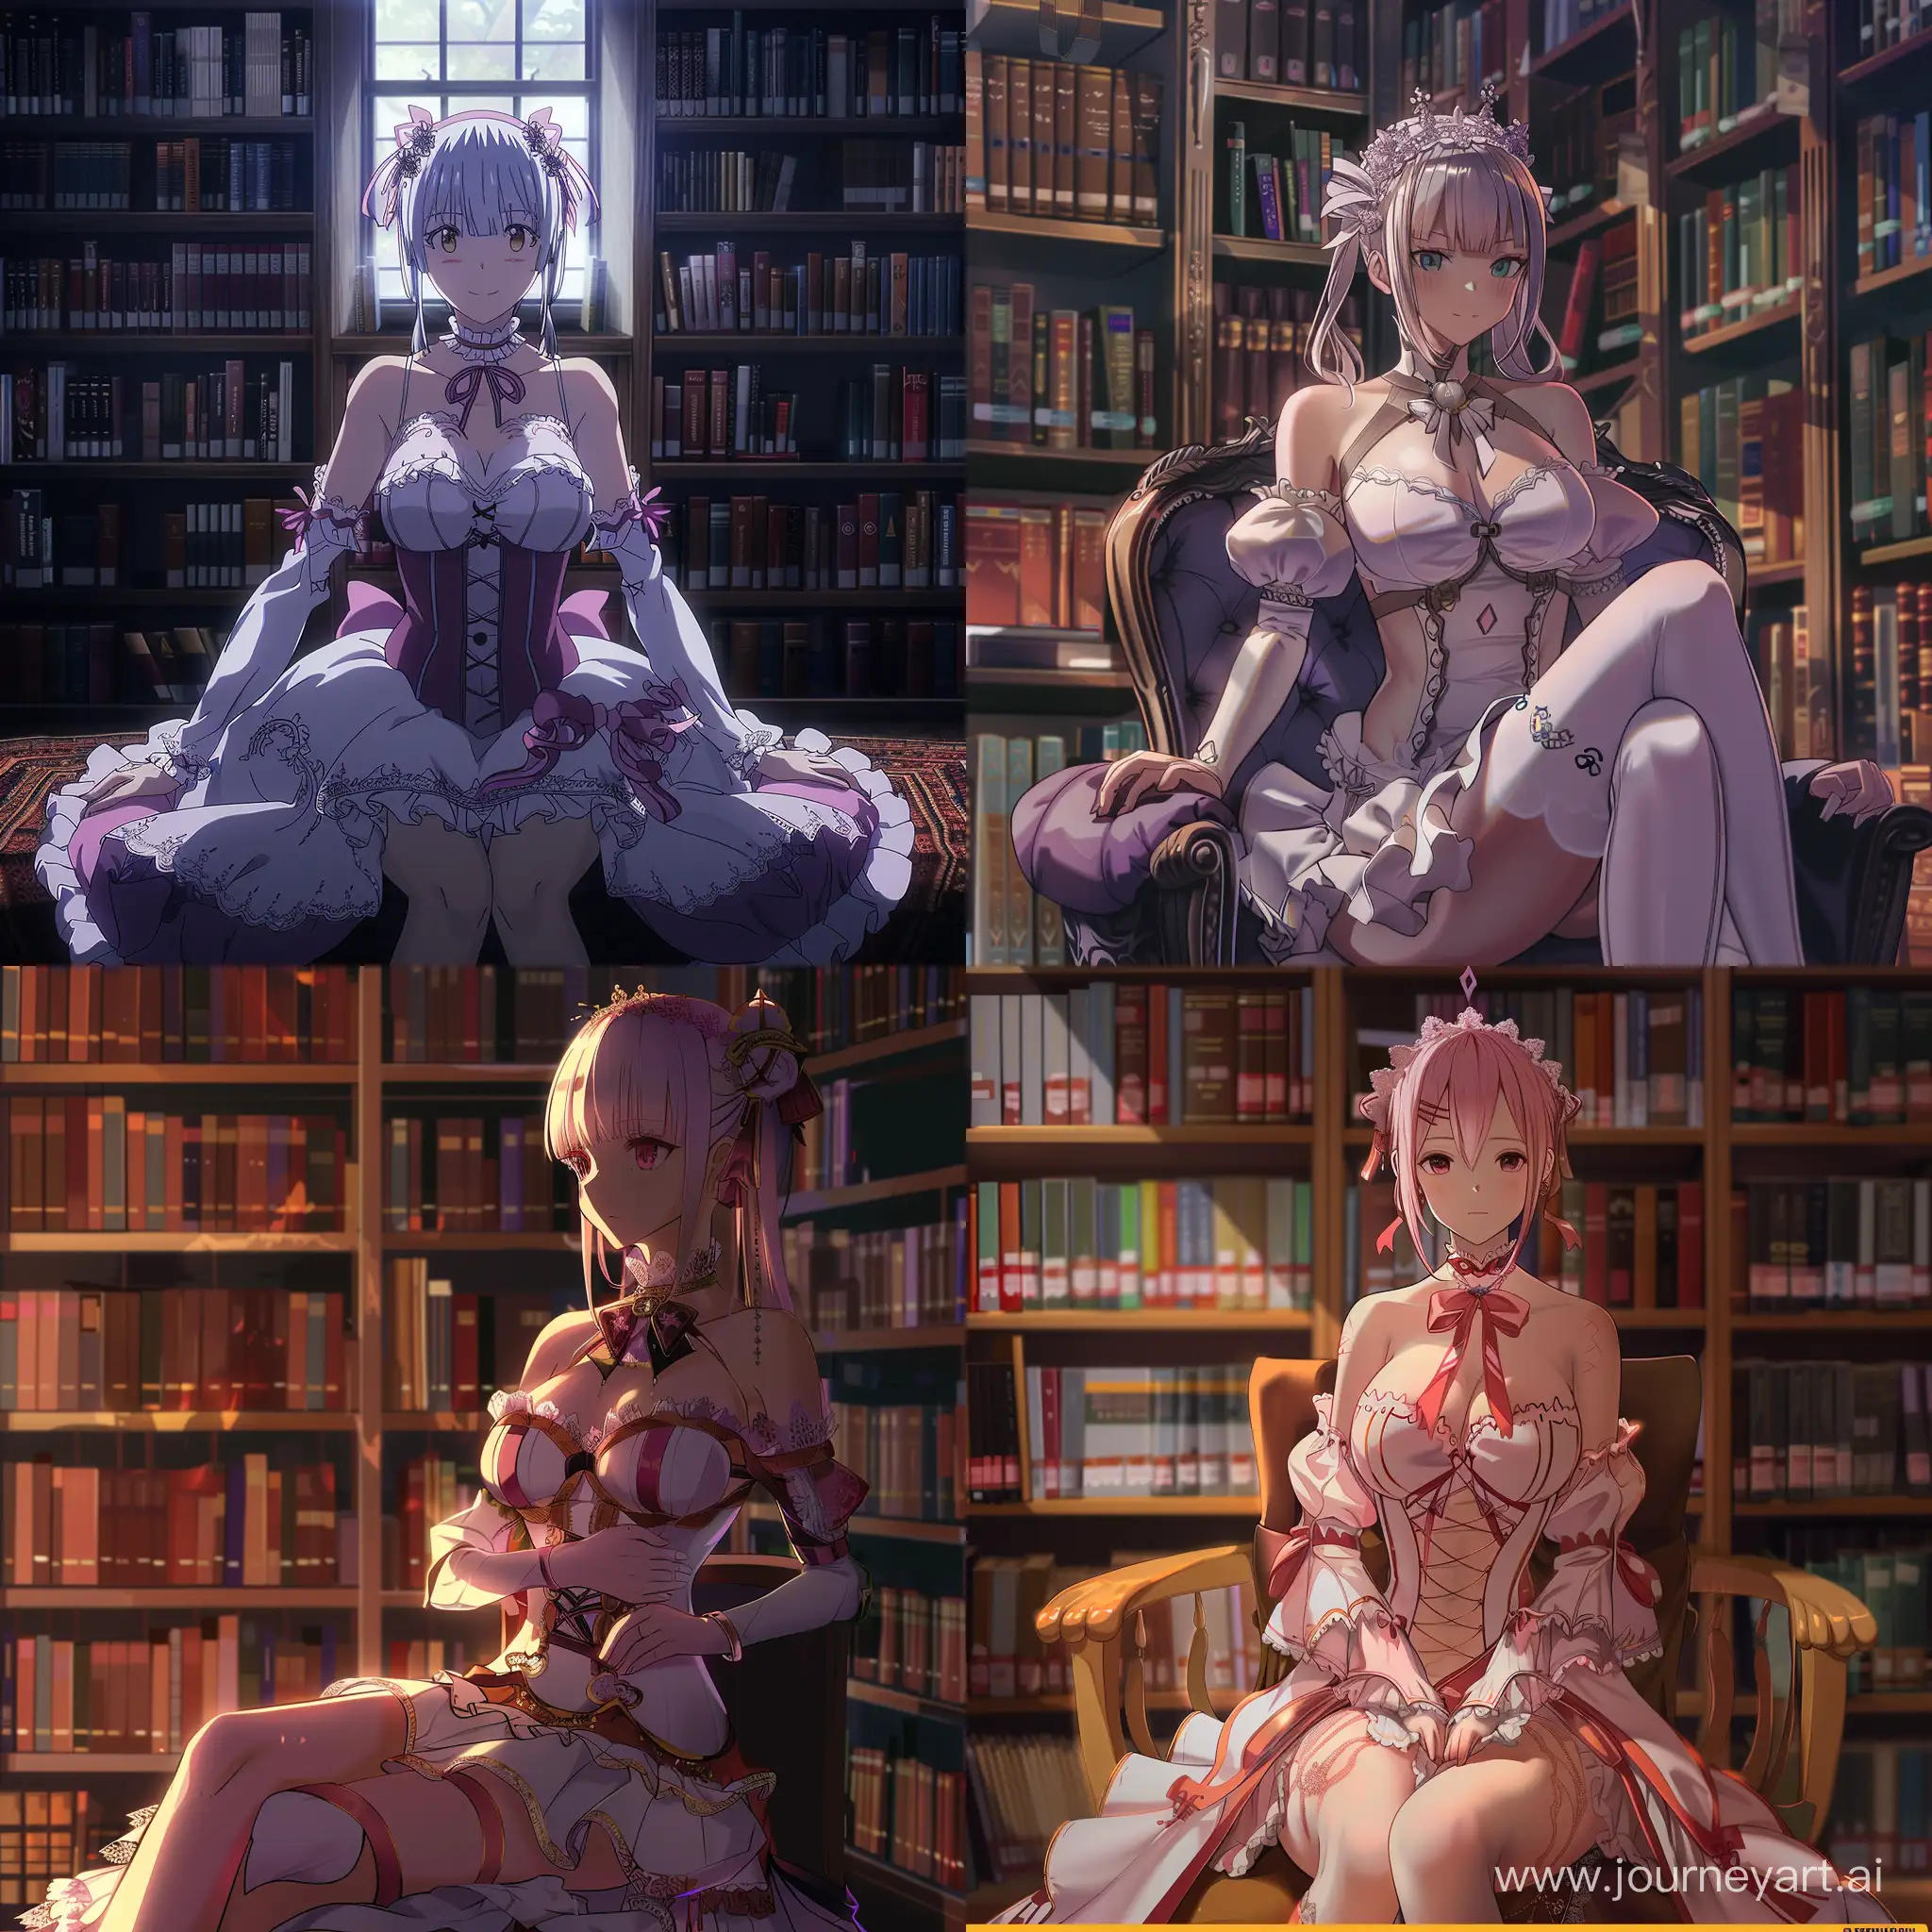 Elegant-Anime-Girl-Beatrice-Enjoys-Reading-in-a-Beautiful-Library